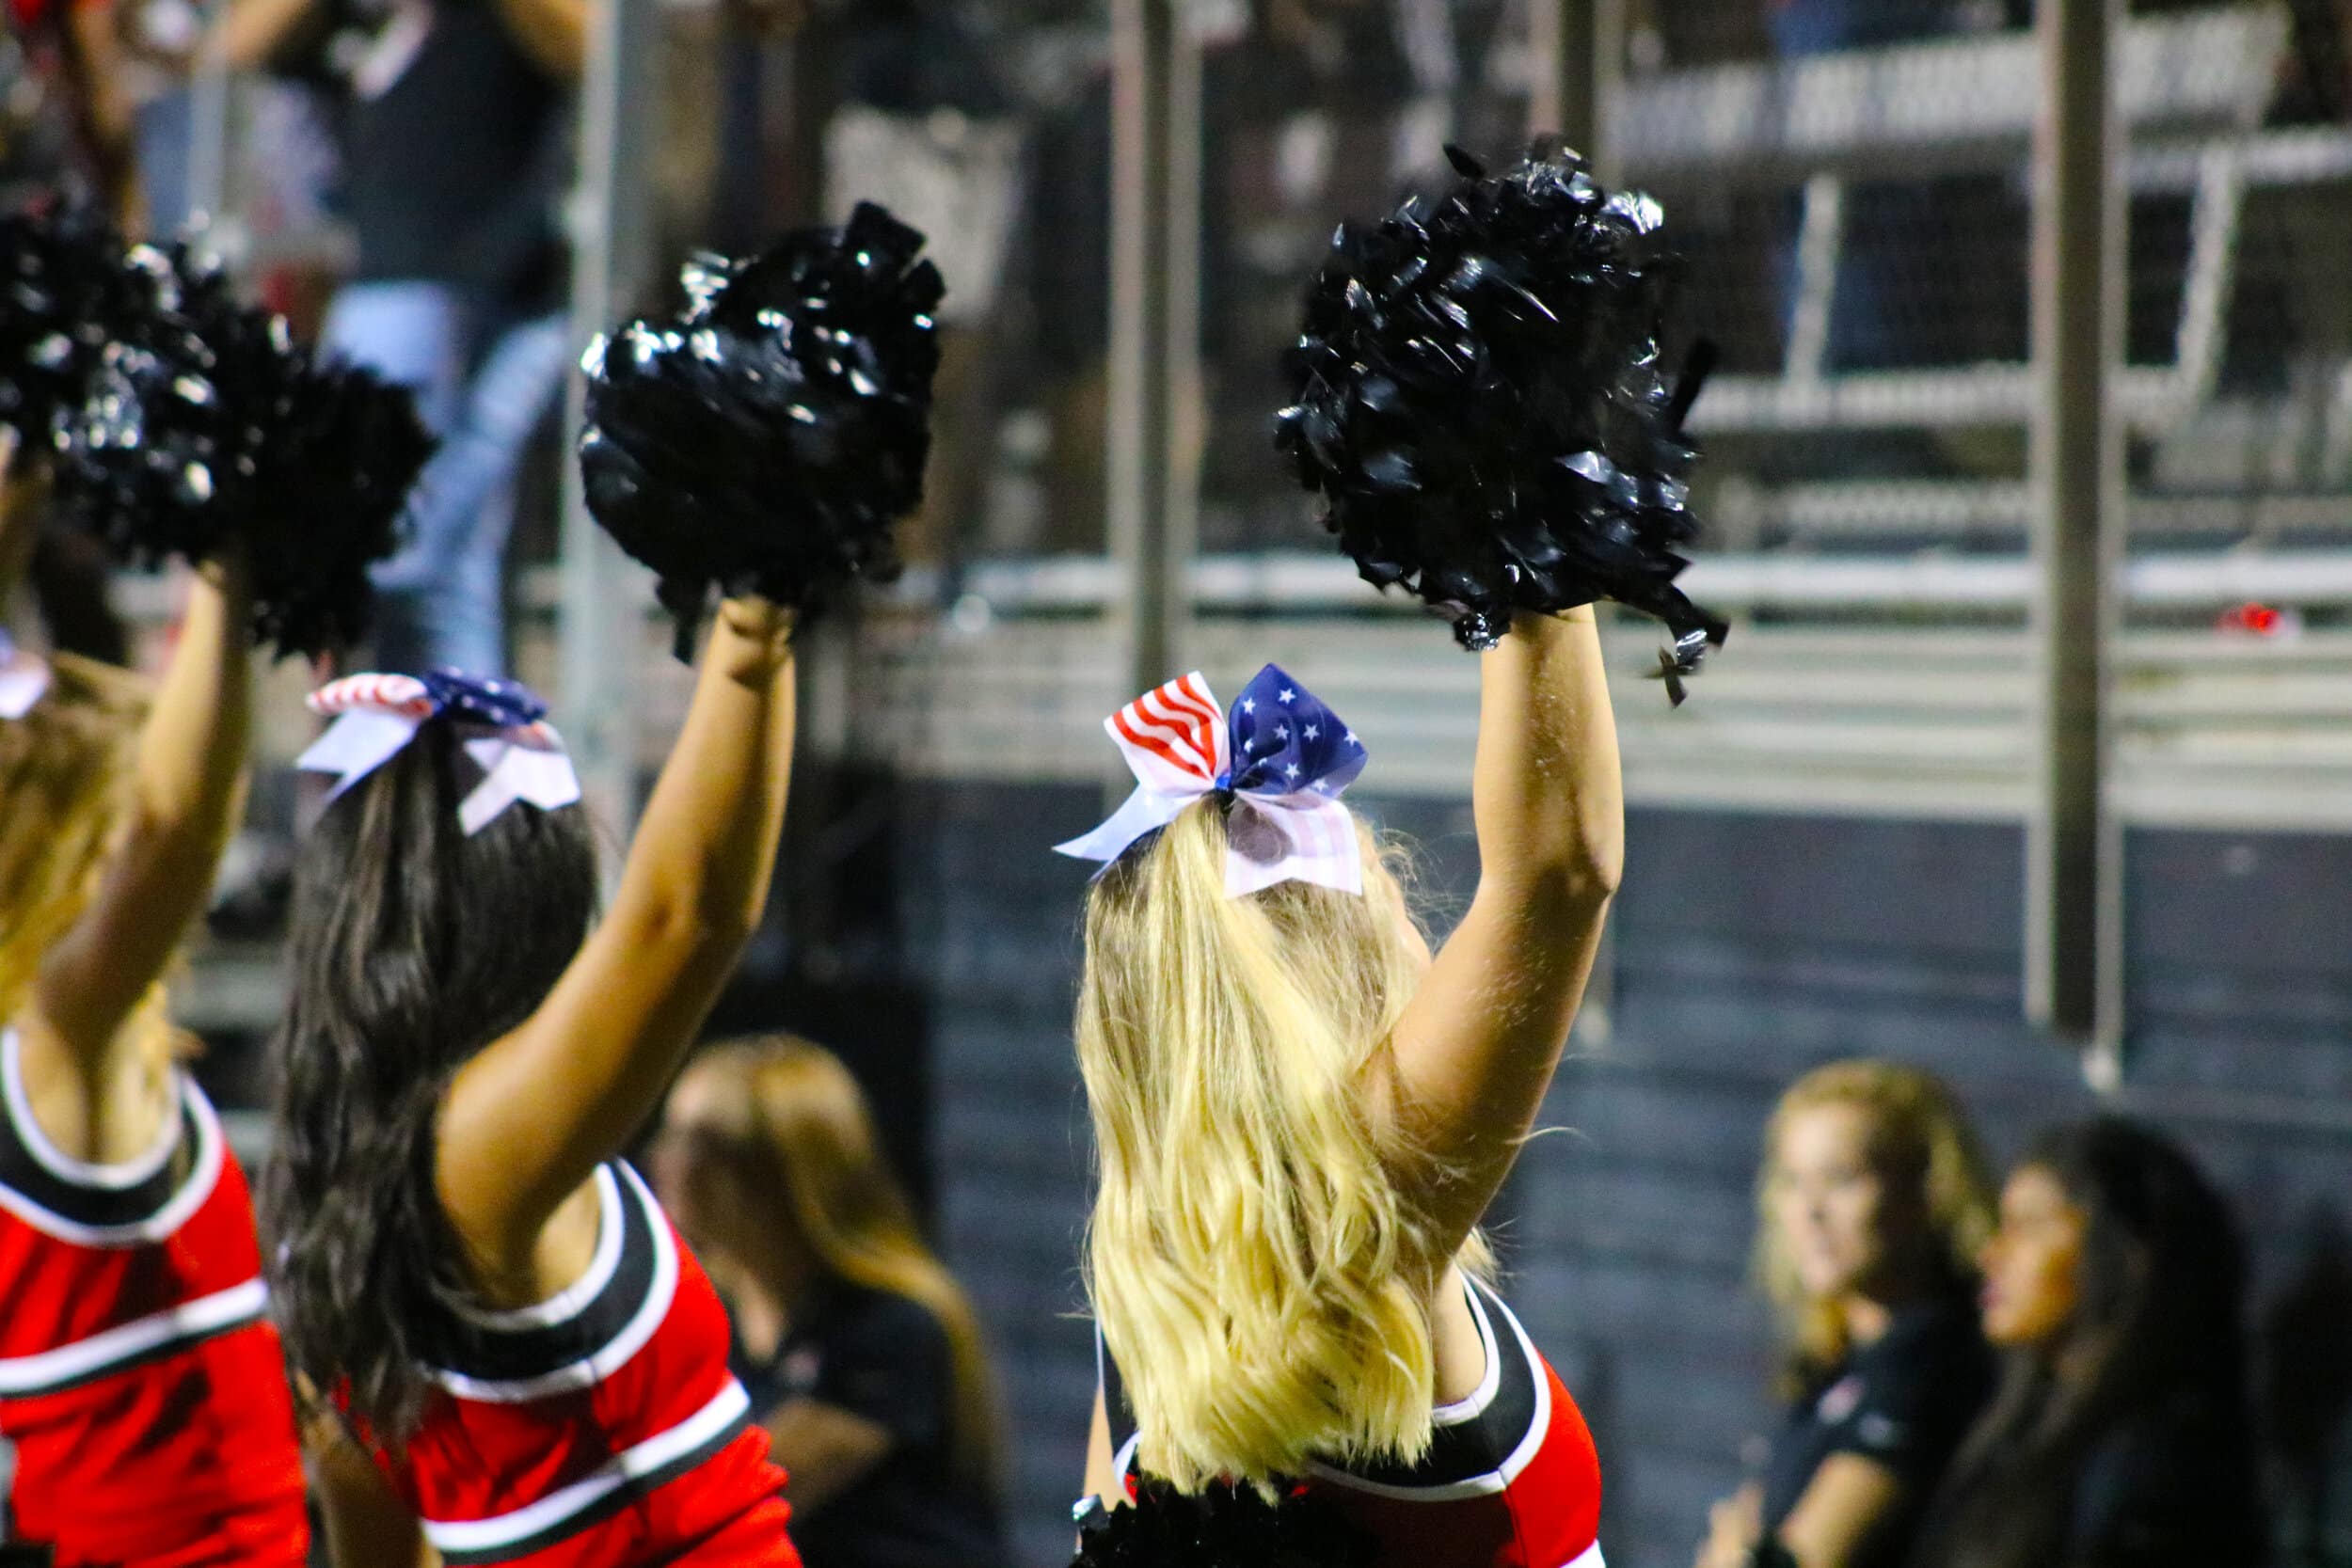 The NGU Cheerleaders cheer on the football team along side the band. They wore American flag bows to support the military during military appreciation night at the game.